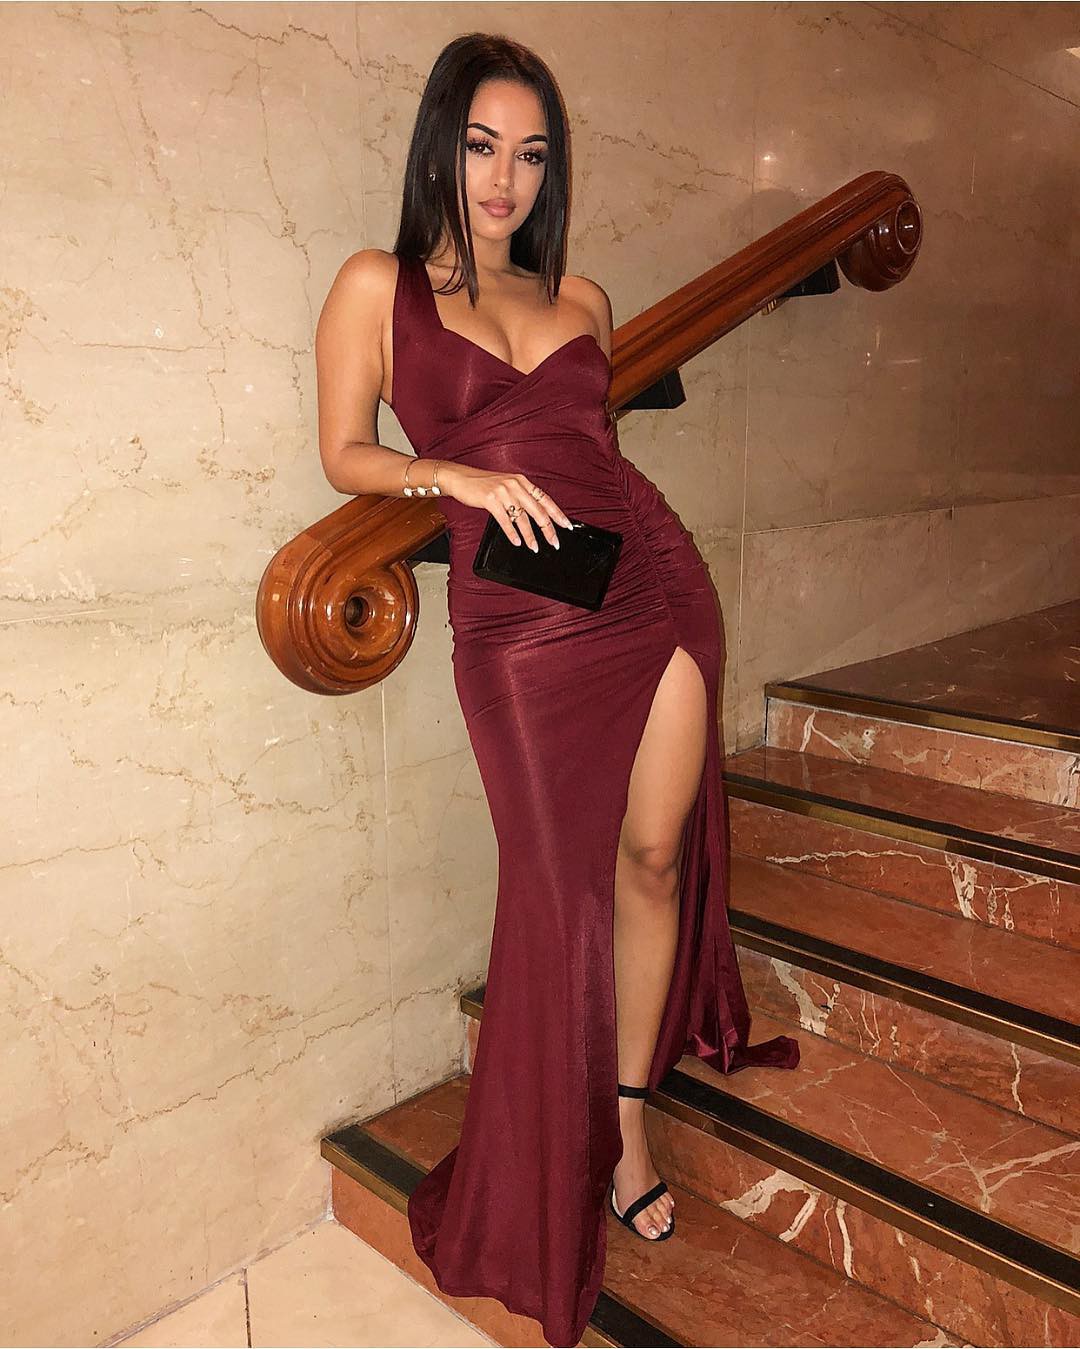 Best Thick Girl Fashion Images In 2019: Cocktail Dresses,  Evening gown,  party outfits,  Pant Suits,  Oh Polly,  Negz Negar  